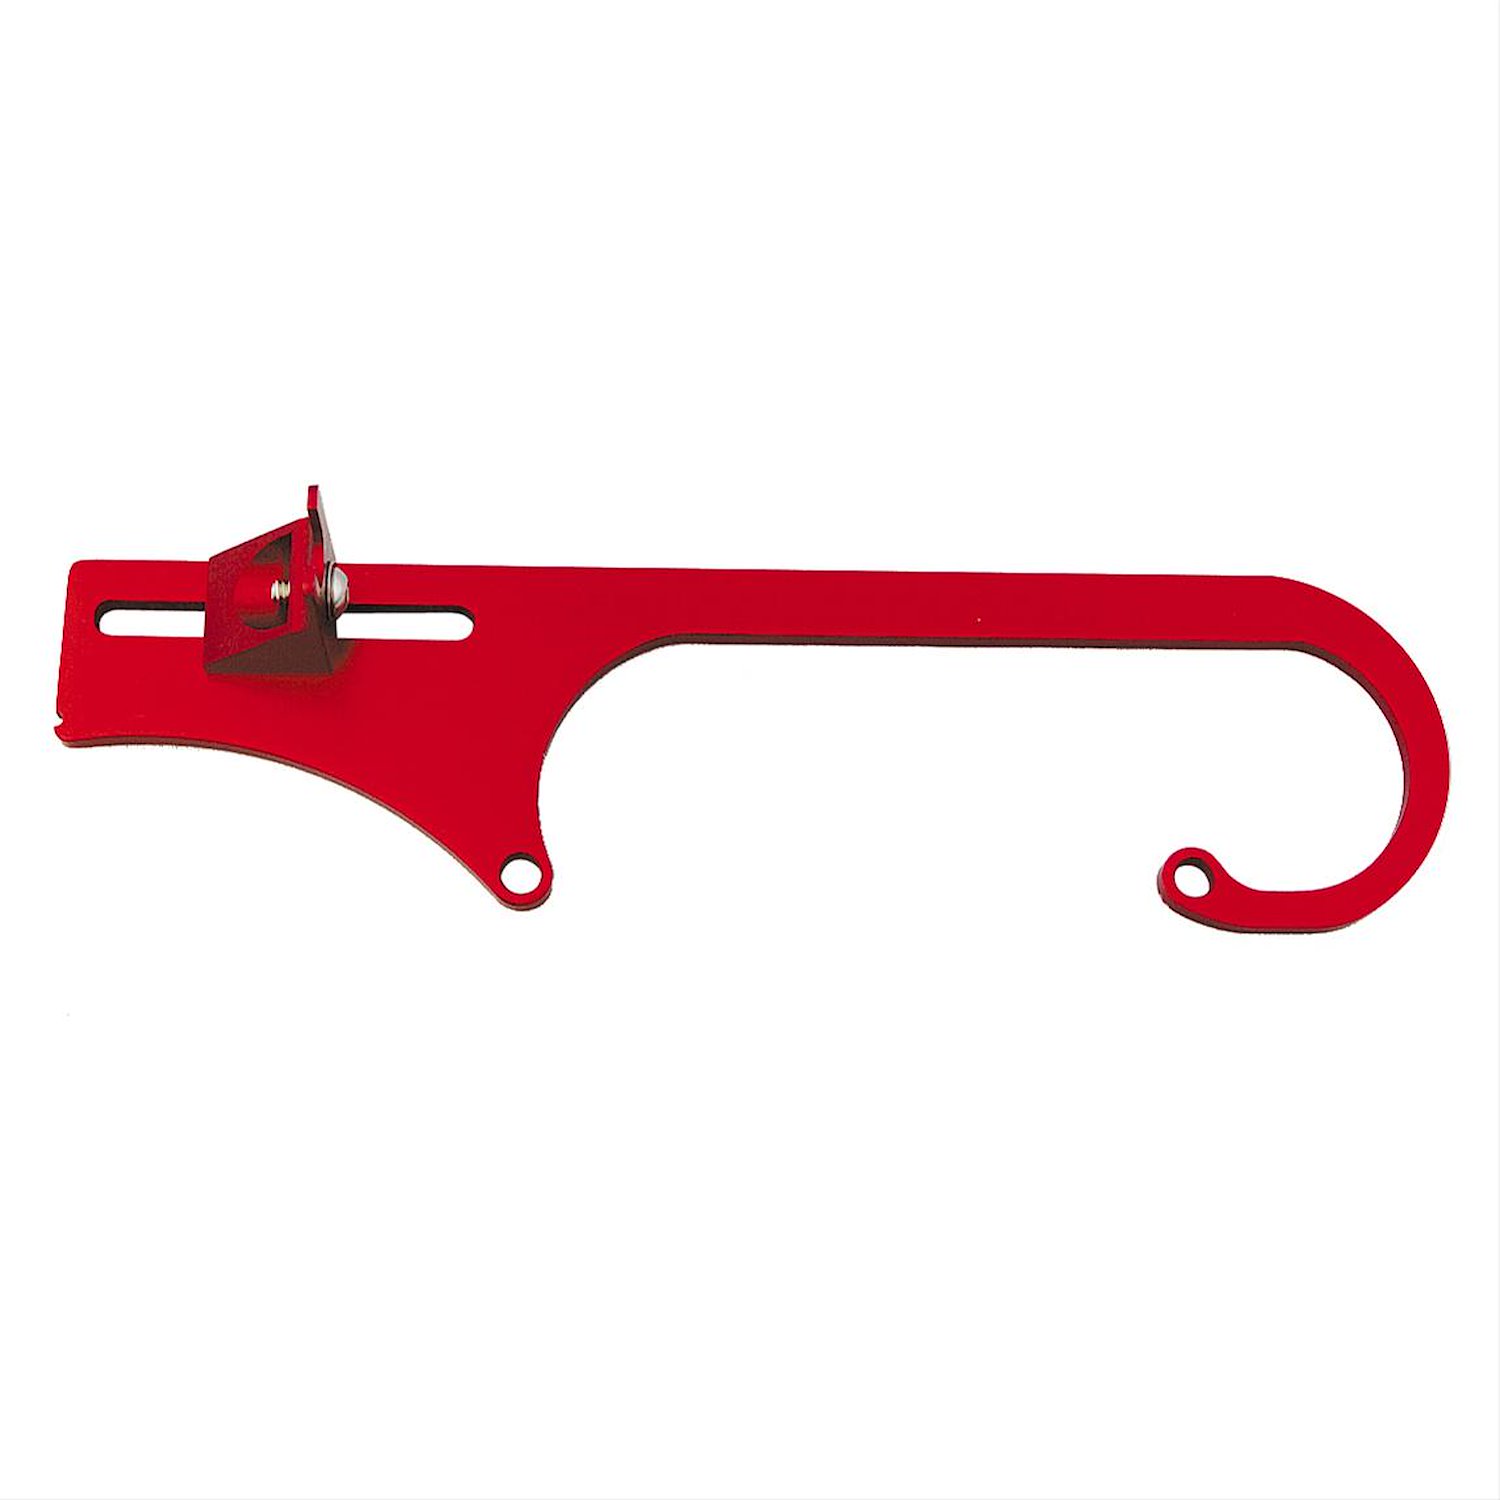 Adjustable Throttle Cable Bracket - Red Fits 4150/3310 Series Holley 750 with Ford Cable